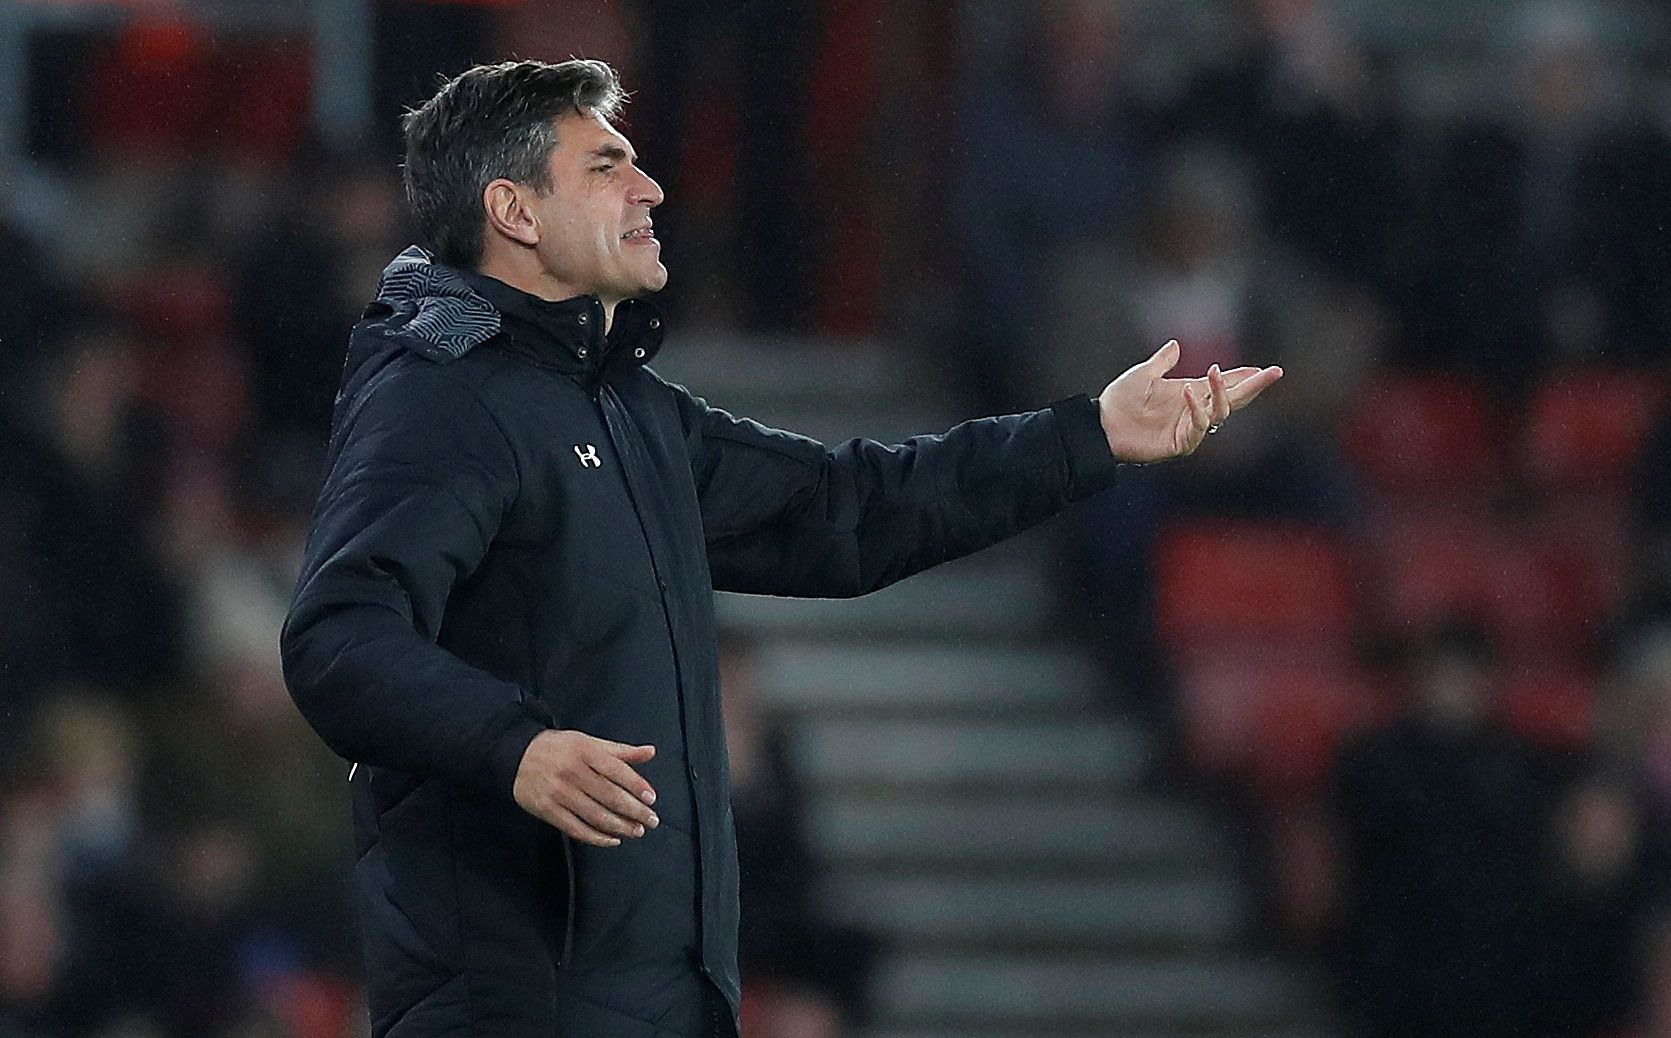 Soccer Football - Premier League - Southampton vs Crystal Palace - St Mary's Stadium, Southampton, Britain - January 2, 2018   Southampton manager Mauricio Pellegrino    Action Images via Reuters/Peter Cziborra    EDITORIAL USE ONLY. No use with unauthorized audio, video, data, fixture lists, club/league logos or 